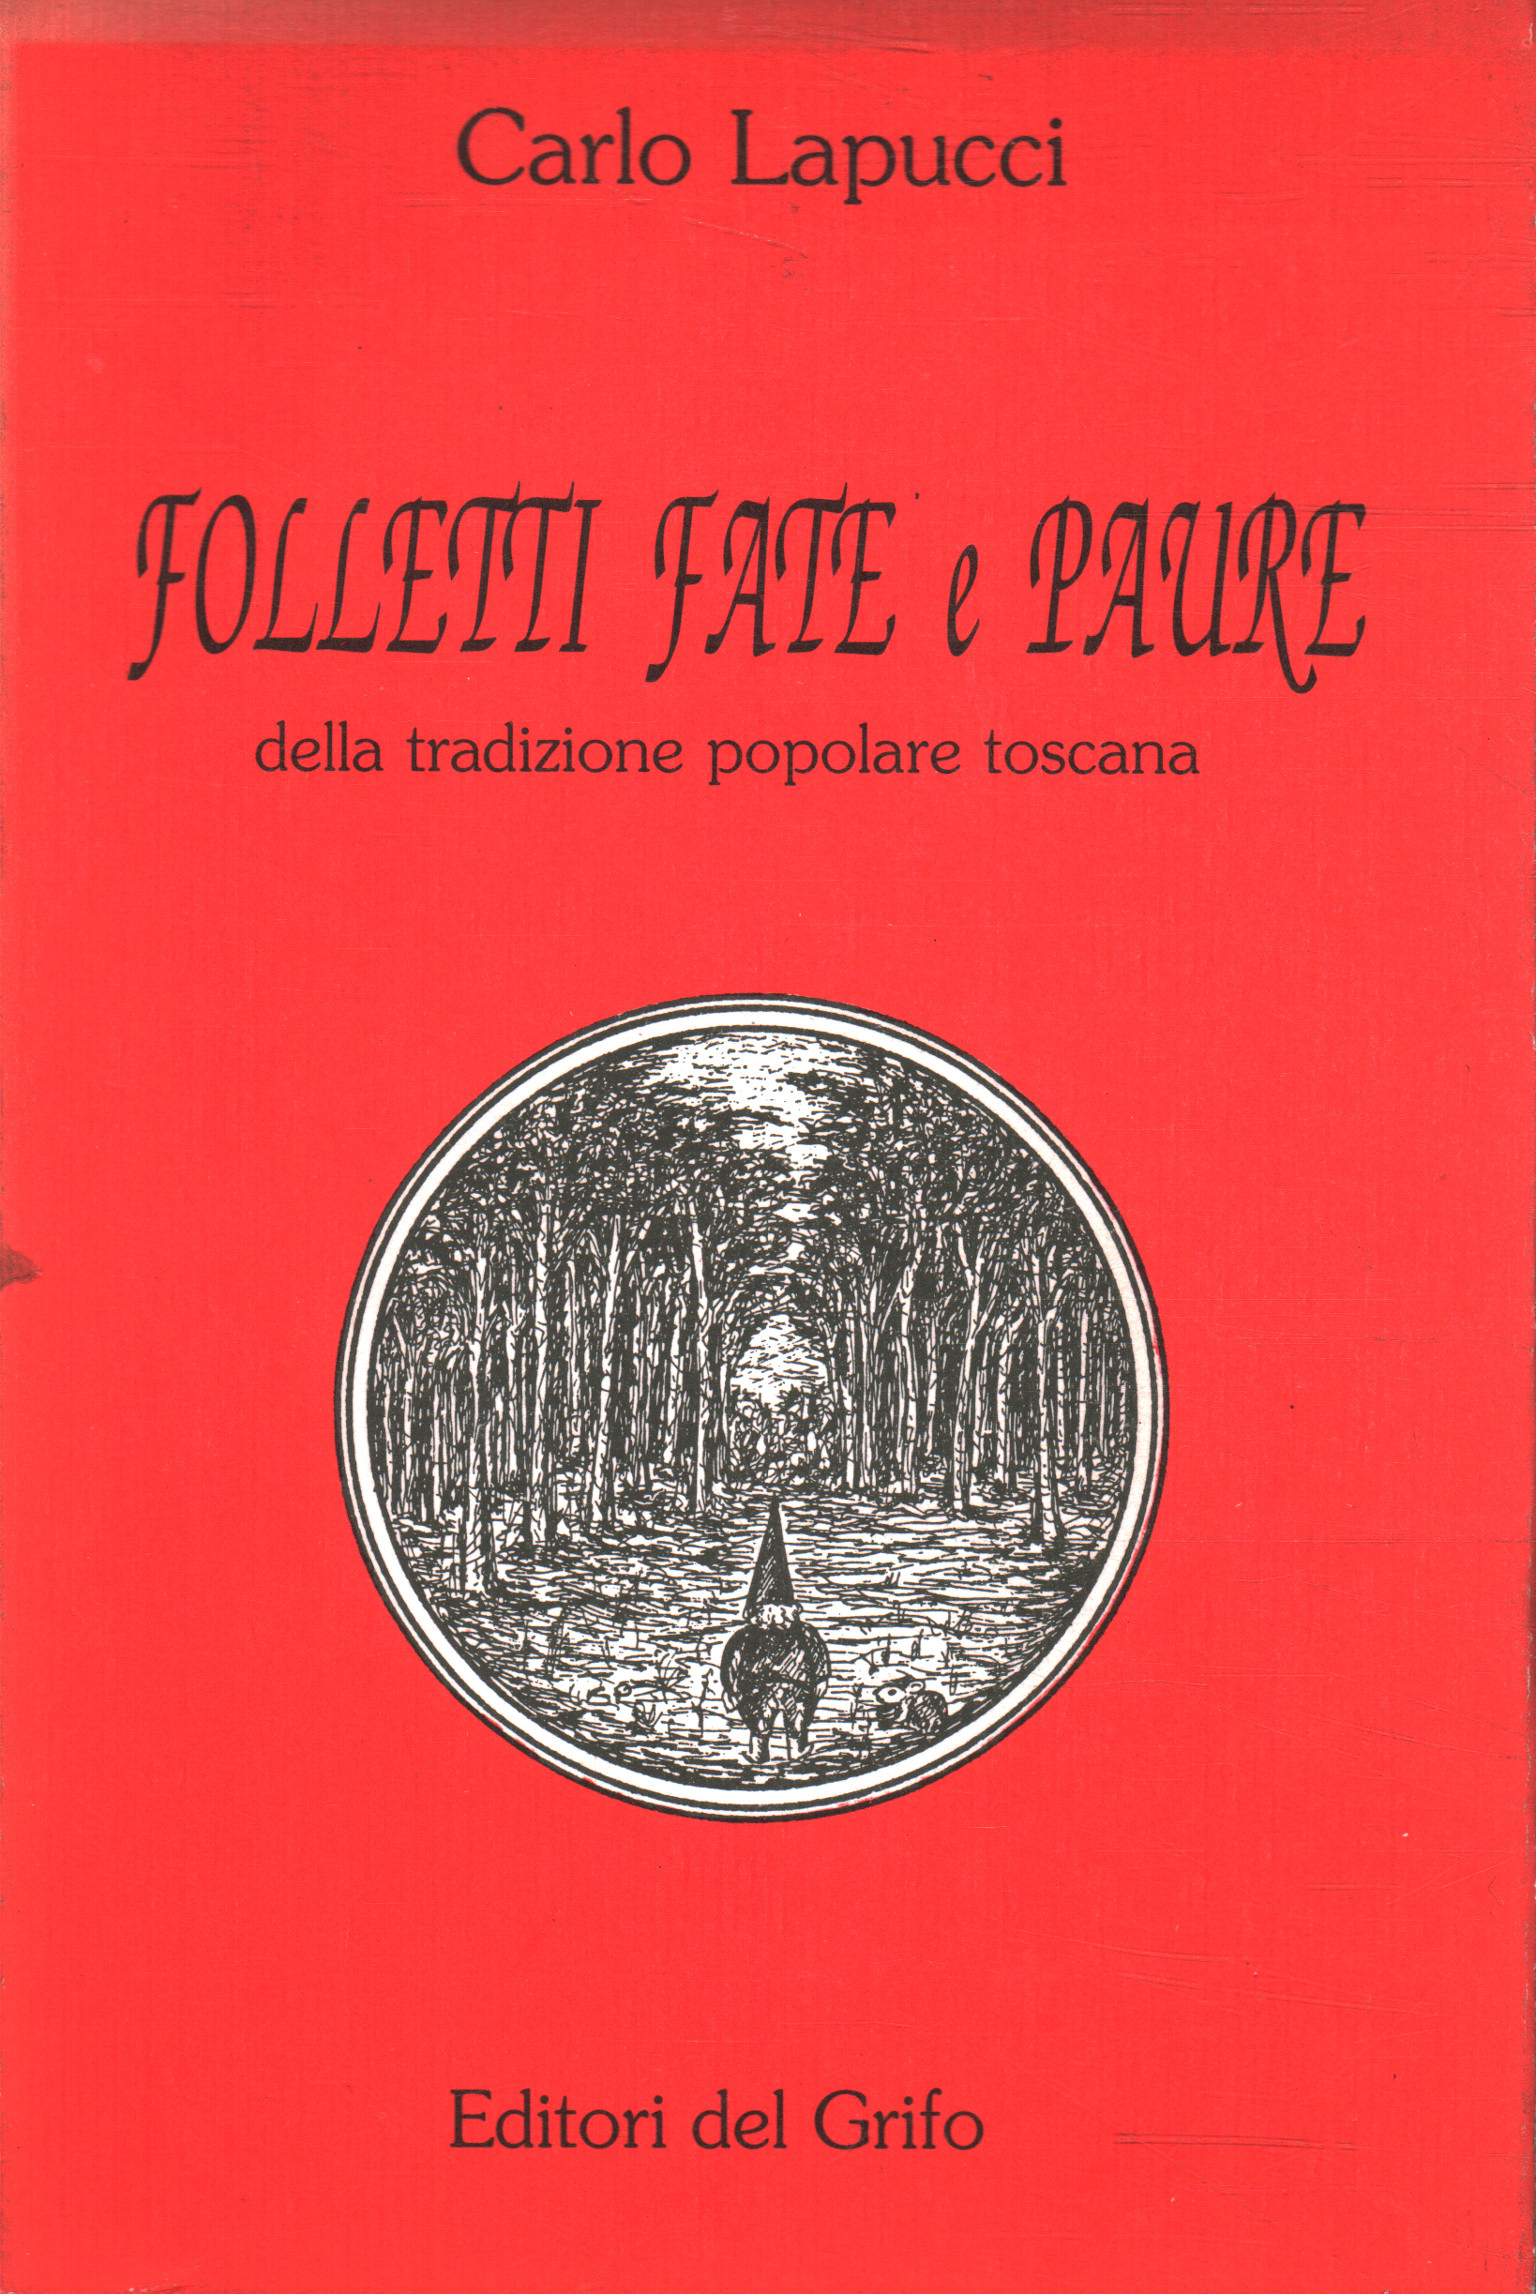 Flletti fairies and fears of tradition% 2, Folletti fairies and fears of tradition%